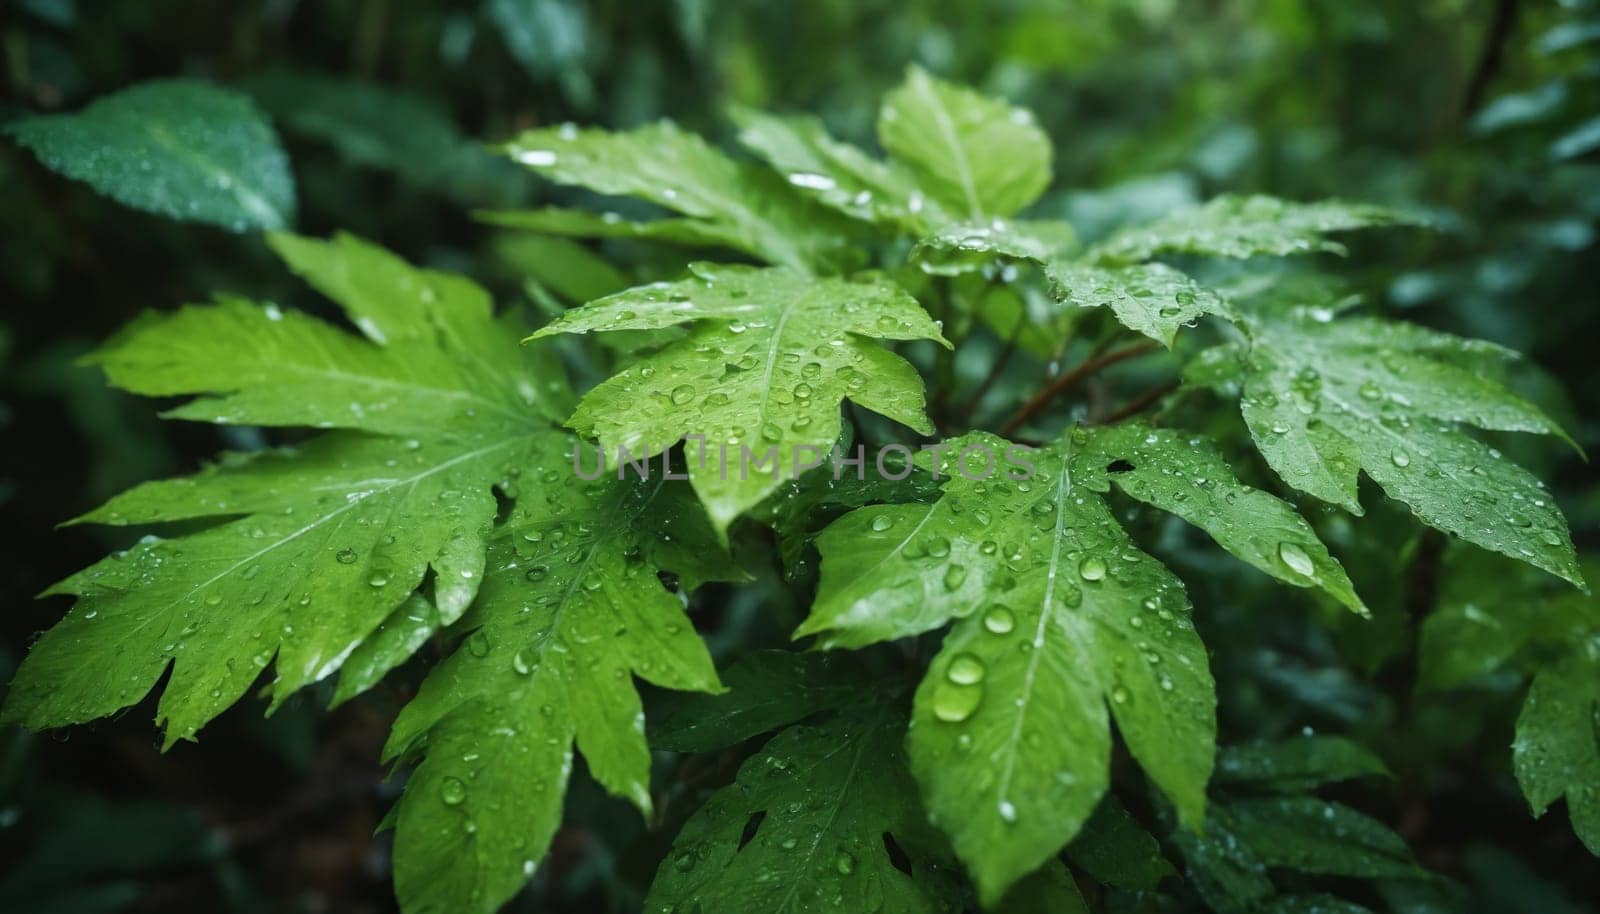 A close-up view of large, green leaves covered in glistening raindrops after a recent summer shower. The leaves are arranged in layers, with some overlapping, creating a sense of depth and texture.